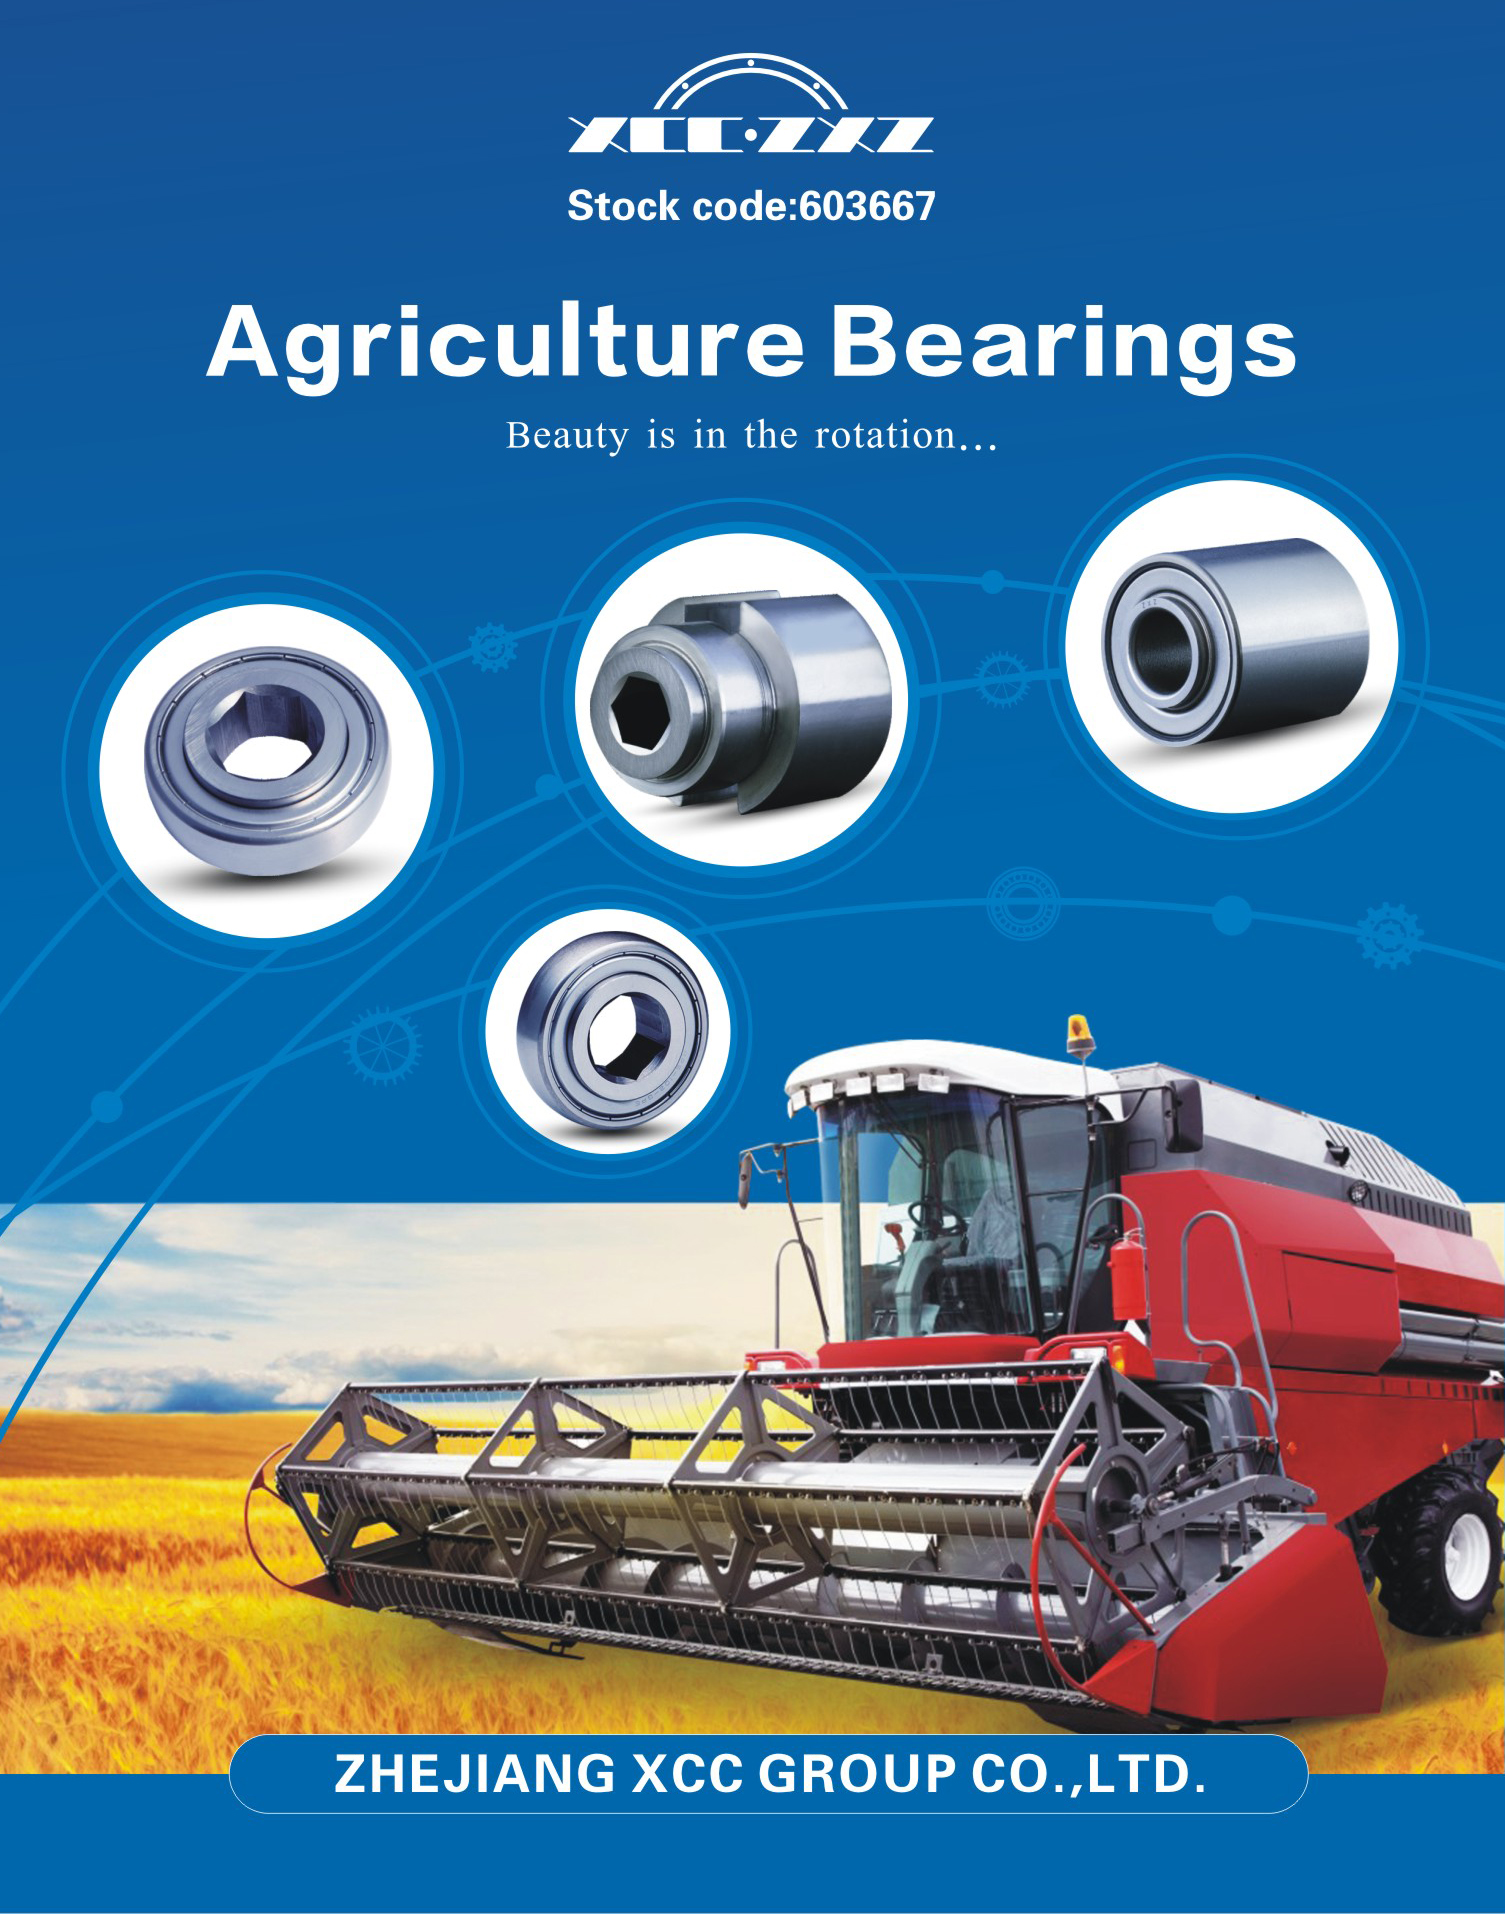 ZXZ agriculture bearings